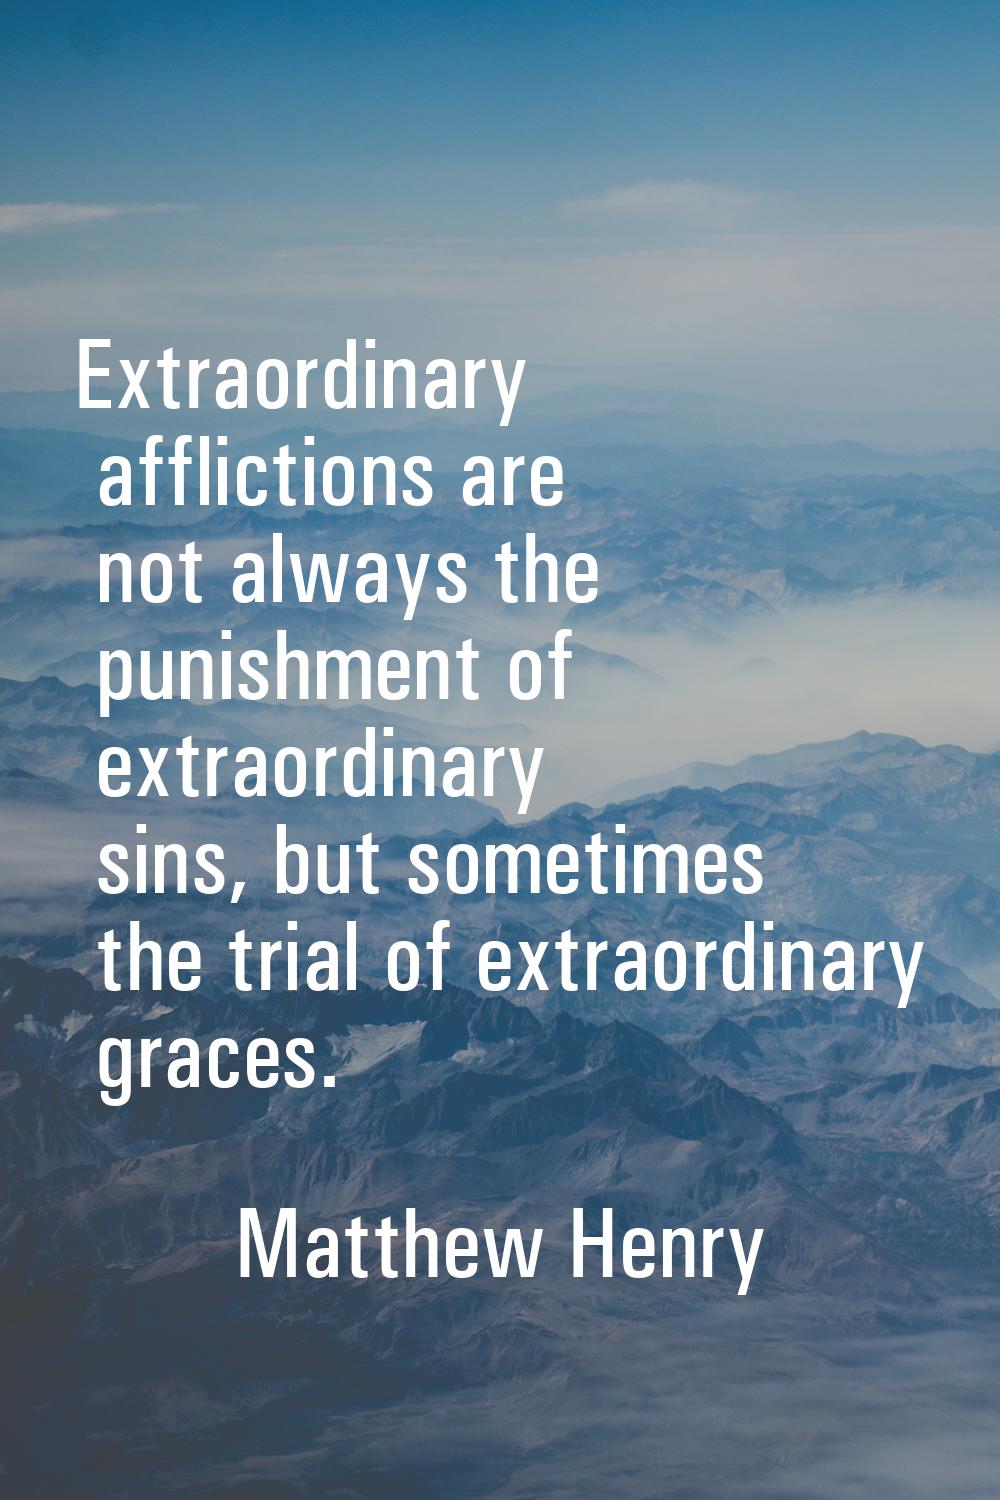 Extraordinary afflictions are not always the punishment of extraordinary sins, but sometimes the tr